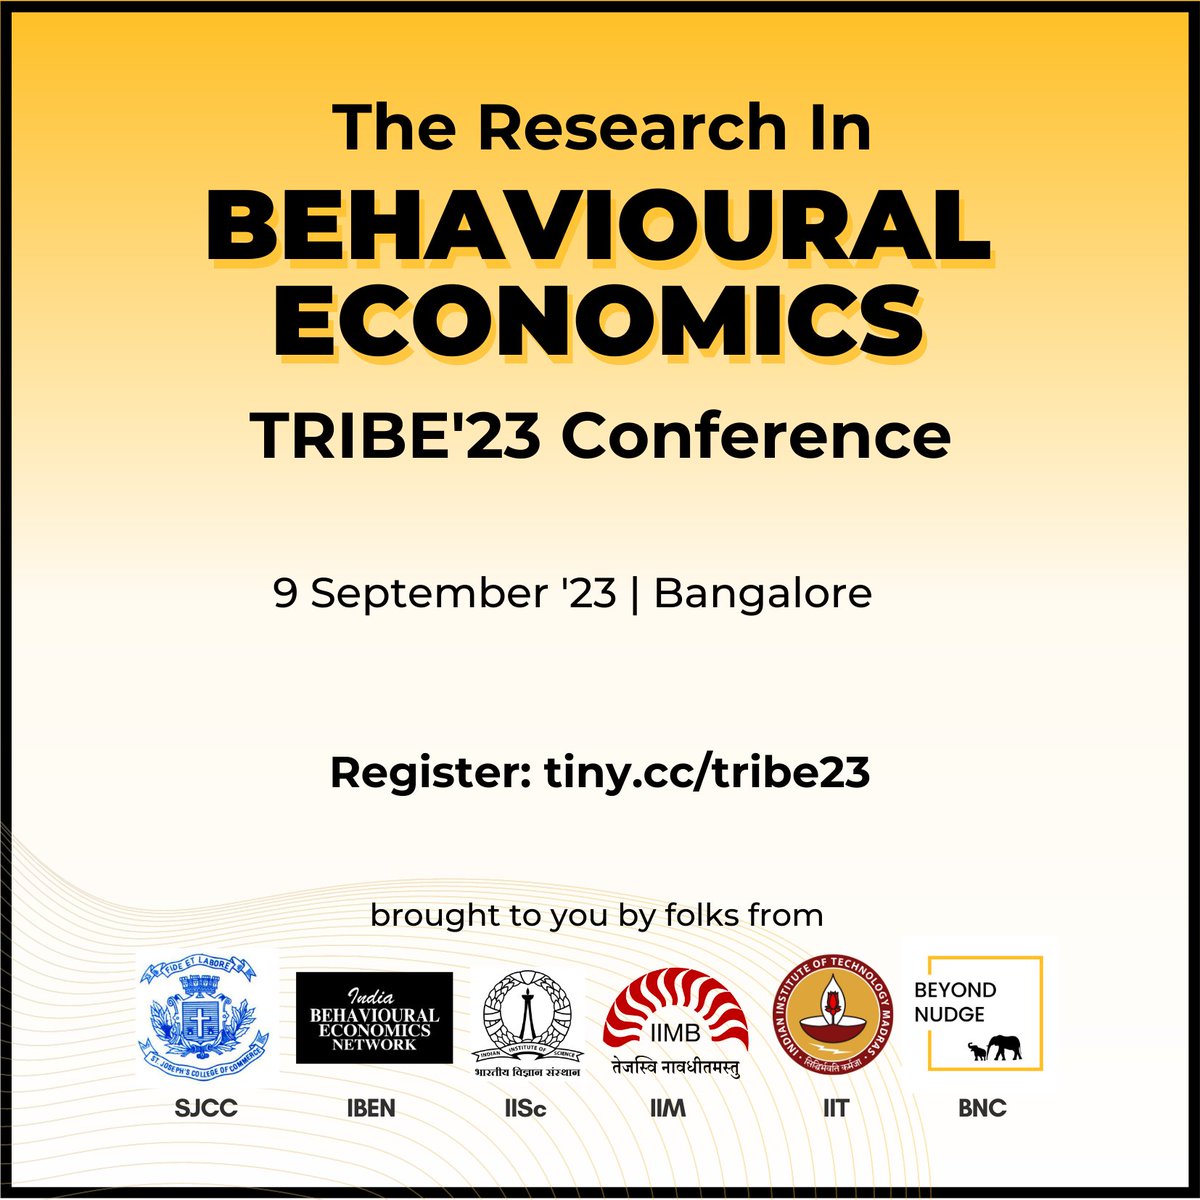 🎉 Event announcement: 'The Research In #BehaviouralEconomics Conference' (TRIBE'23)! 🎉
Join us to explore the captivating world of decision-making and human behaviour 🧠 on 9 Sept 23 in Bangalore!
🔗 Register now: tiny.cc/tribe23
#DecisionMaking #HumanBehaviour